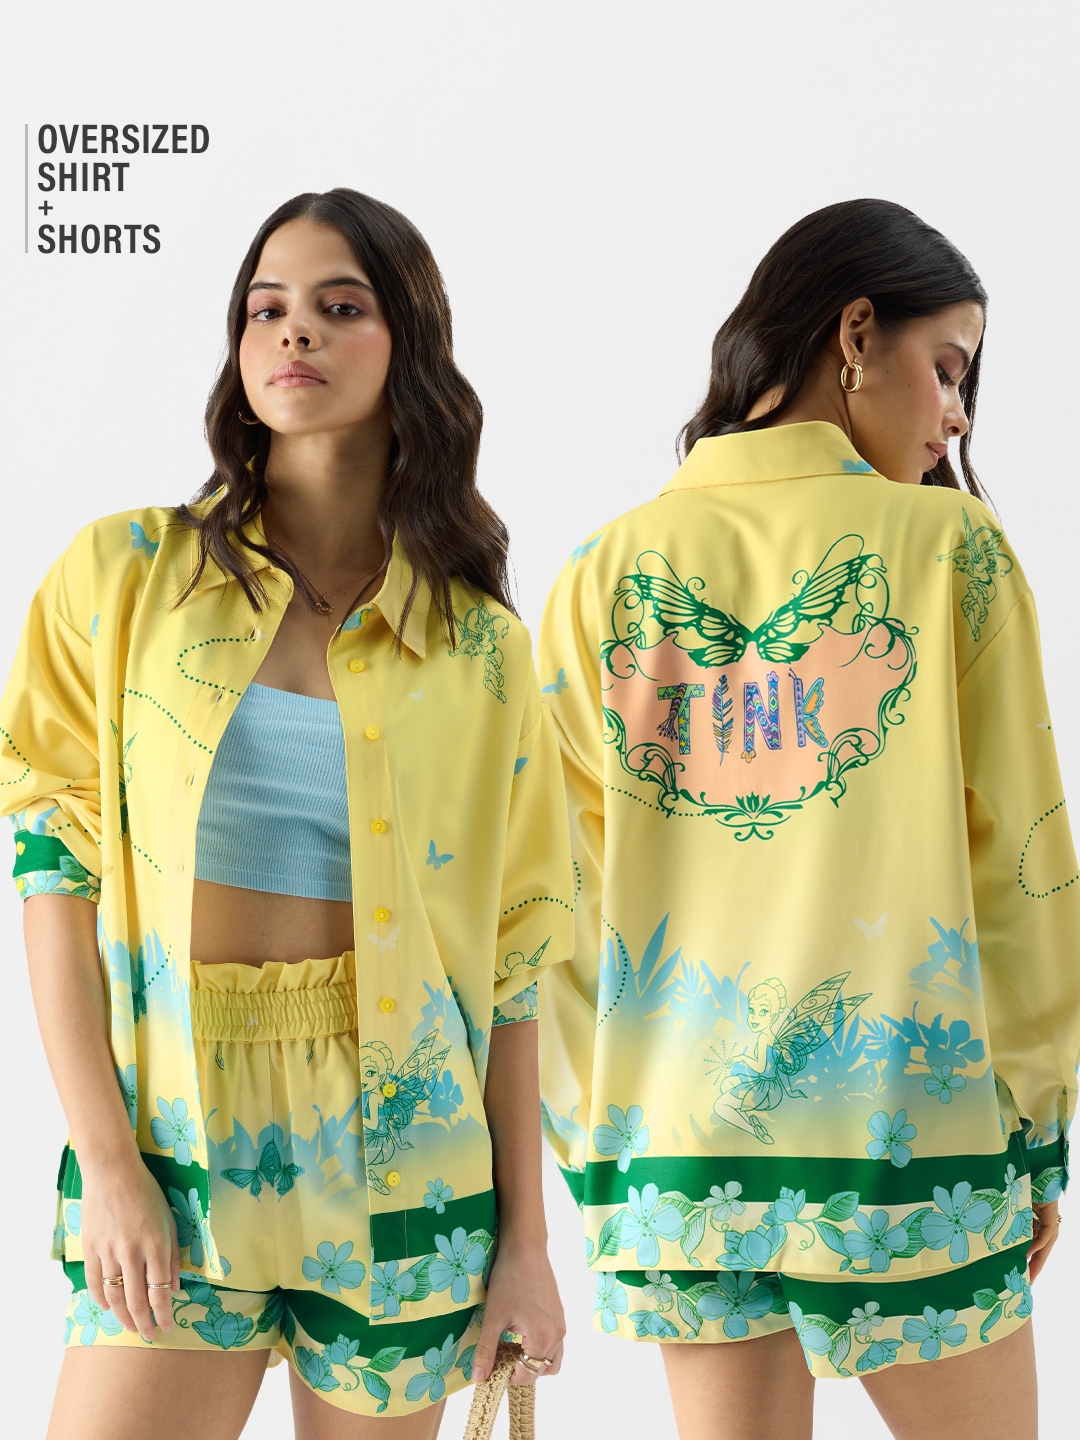 The Souled Store | Women's Tinker Bell: Touch of Magic Women's Oversized Shirts